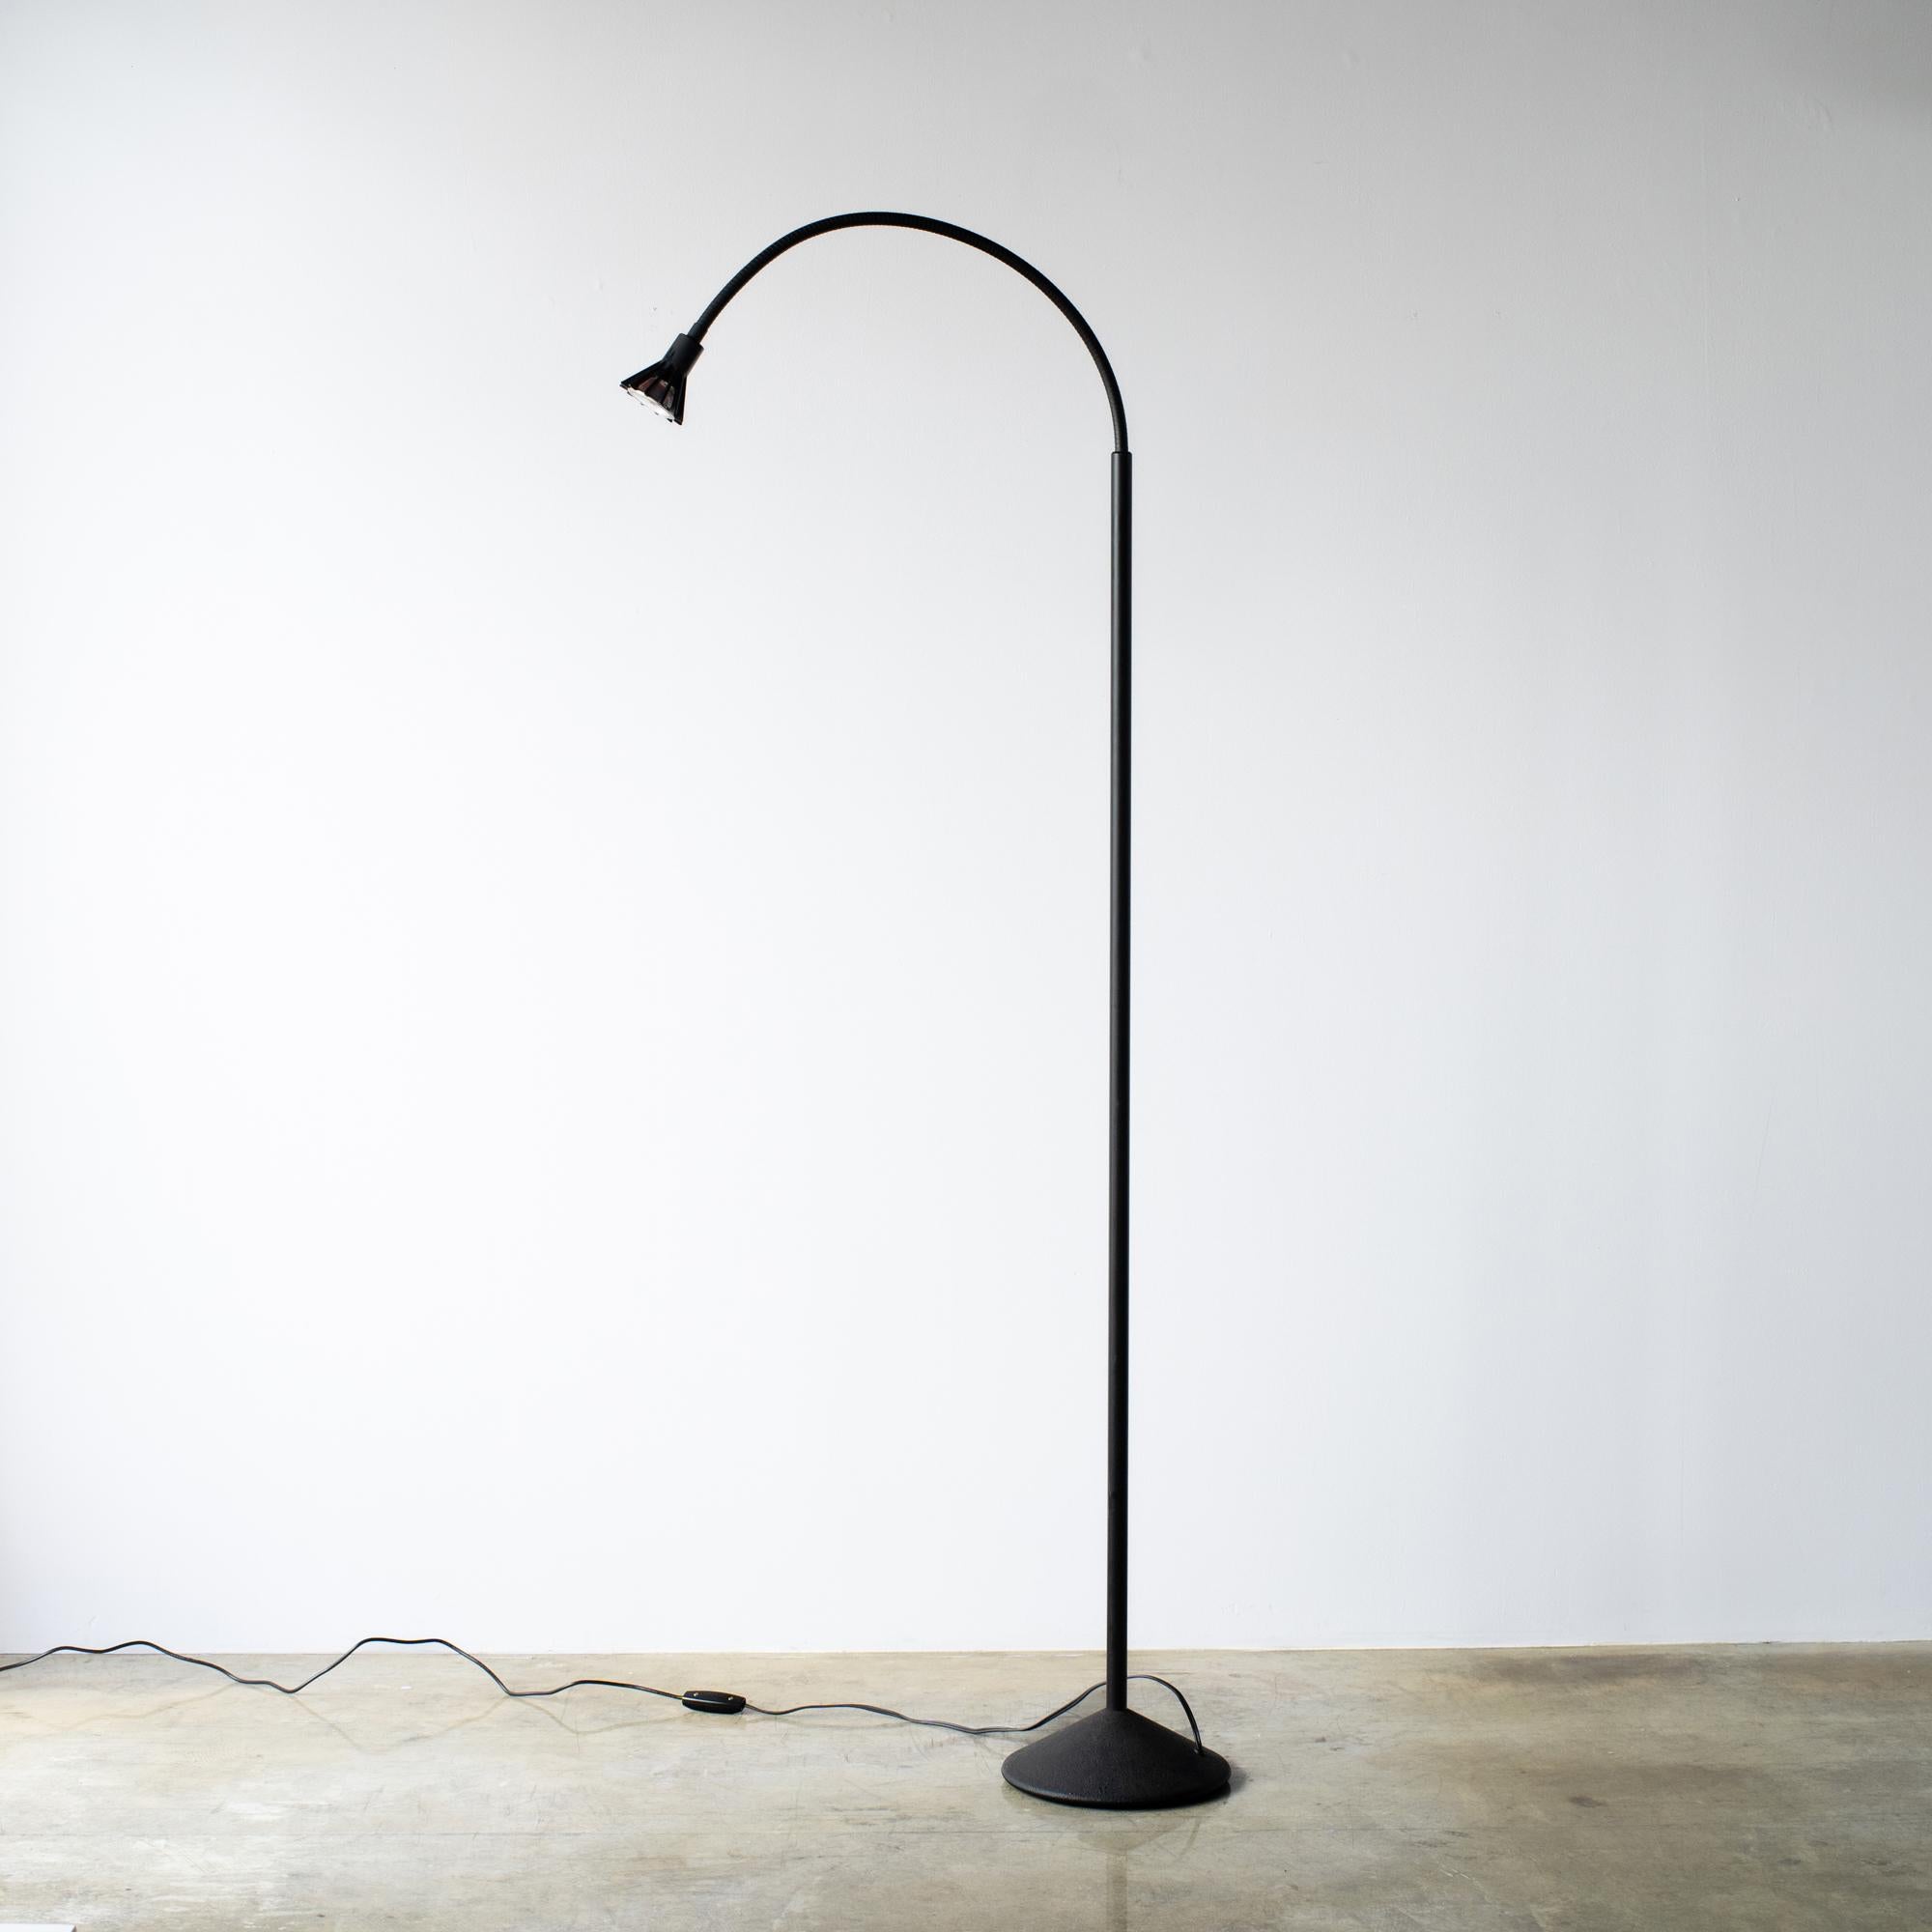 Floor lamp designed by Raul Barbieri and Giorgio Marianelli for Tronconi. The name is Solitaire. black steel painted body. 
It has flexible arm to turn in any direction. Light covers small area. Suitable for the time of reading books sitting on the